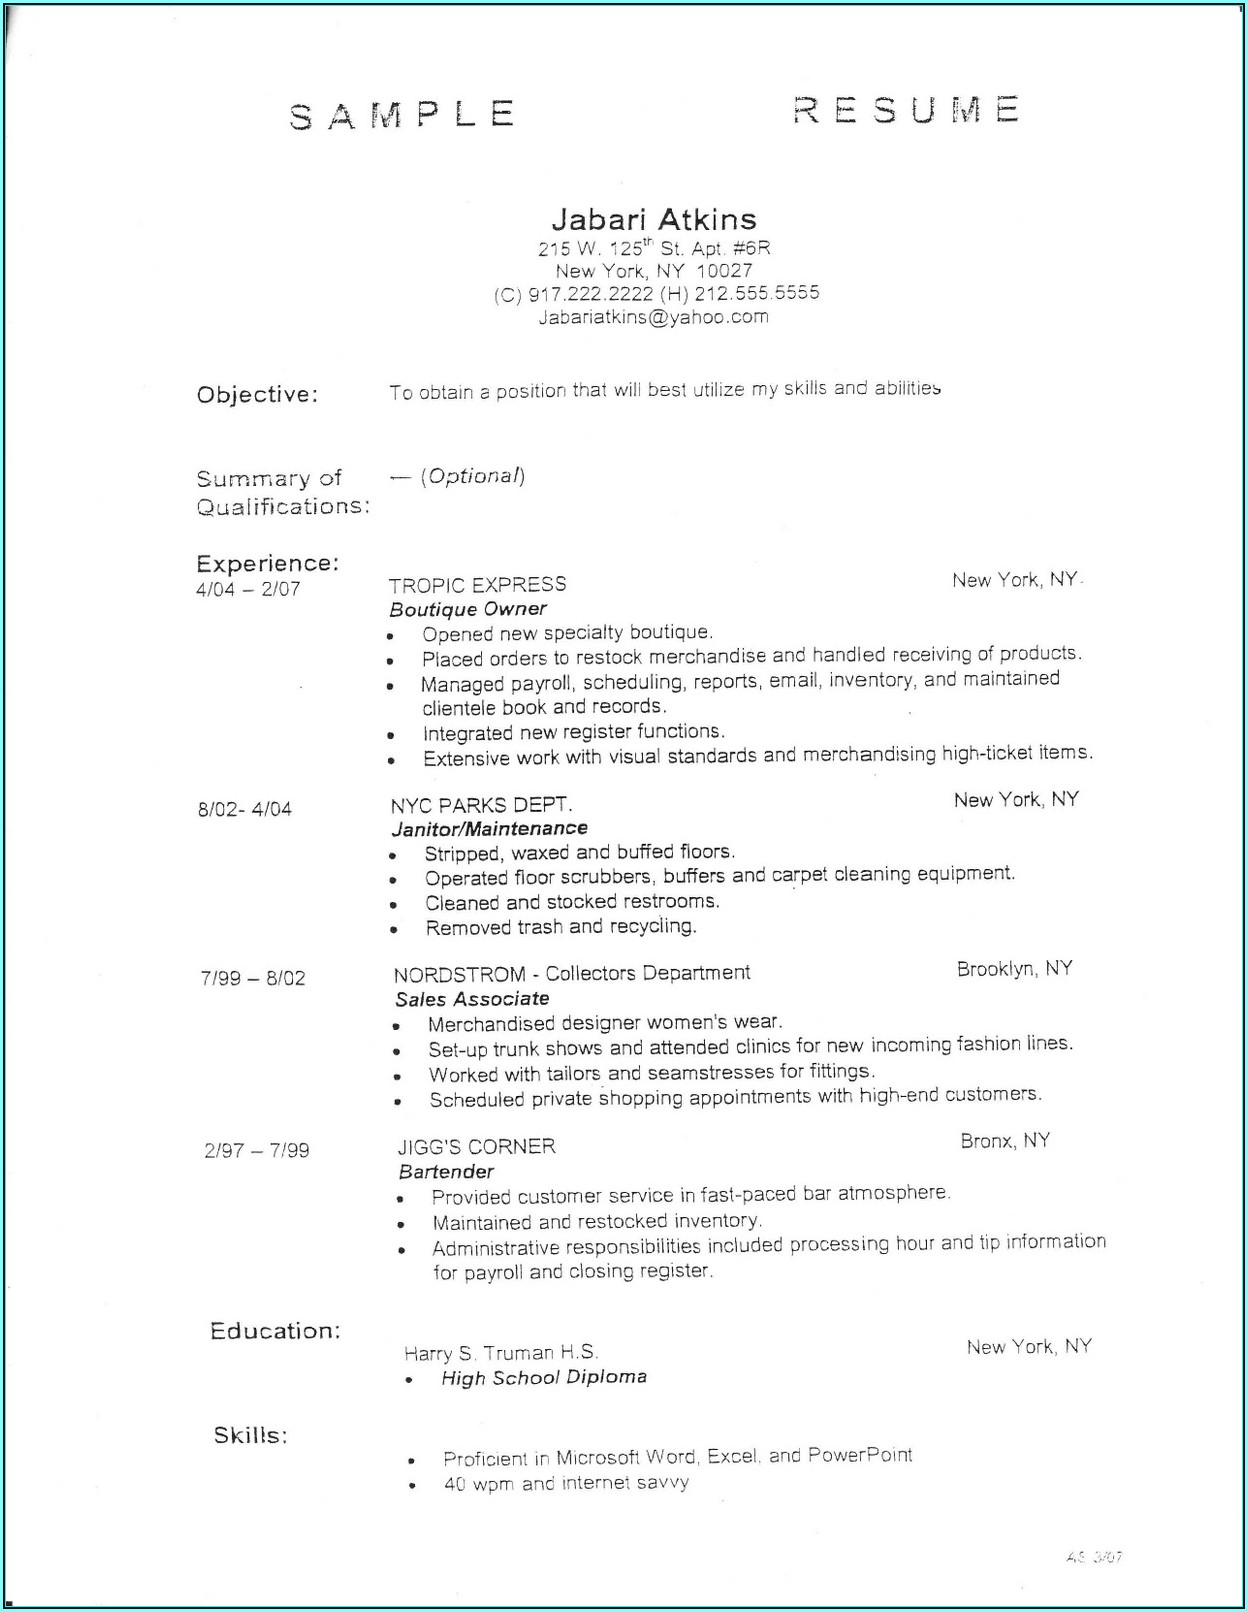 Outlines Of Resumes For Jobs